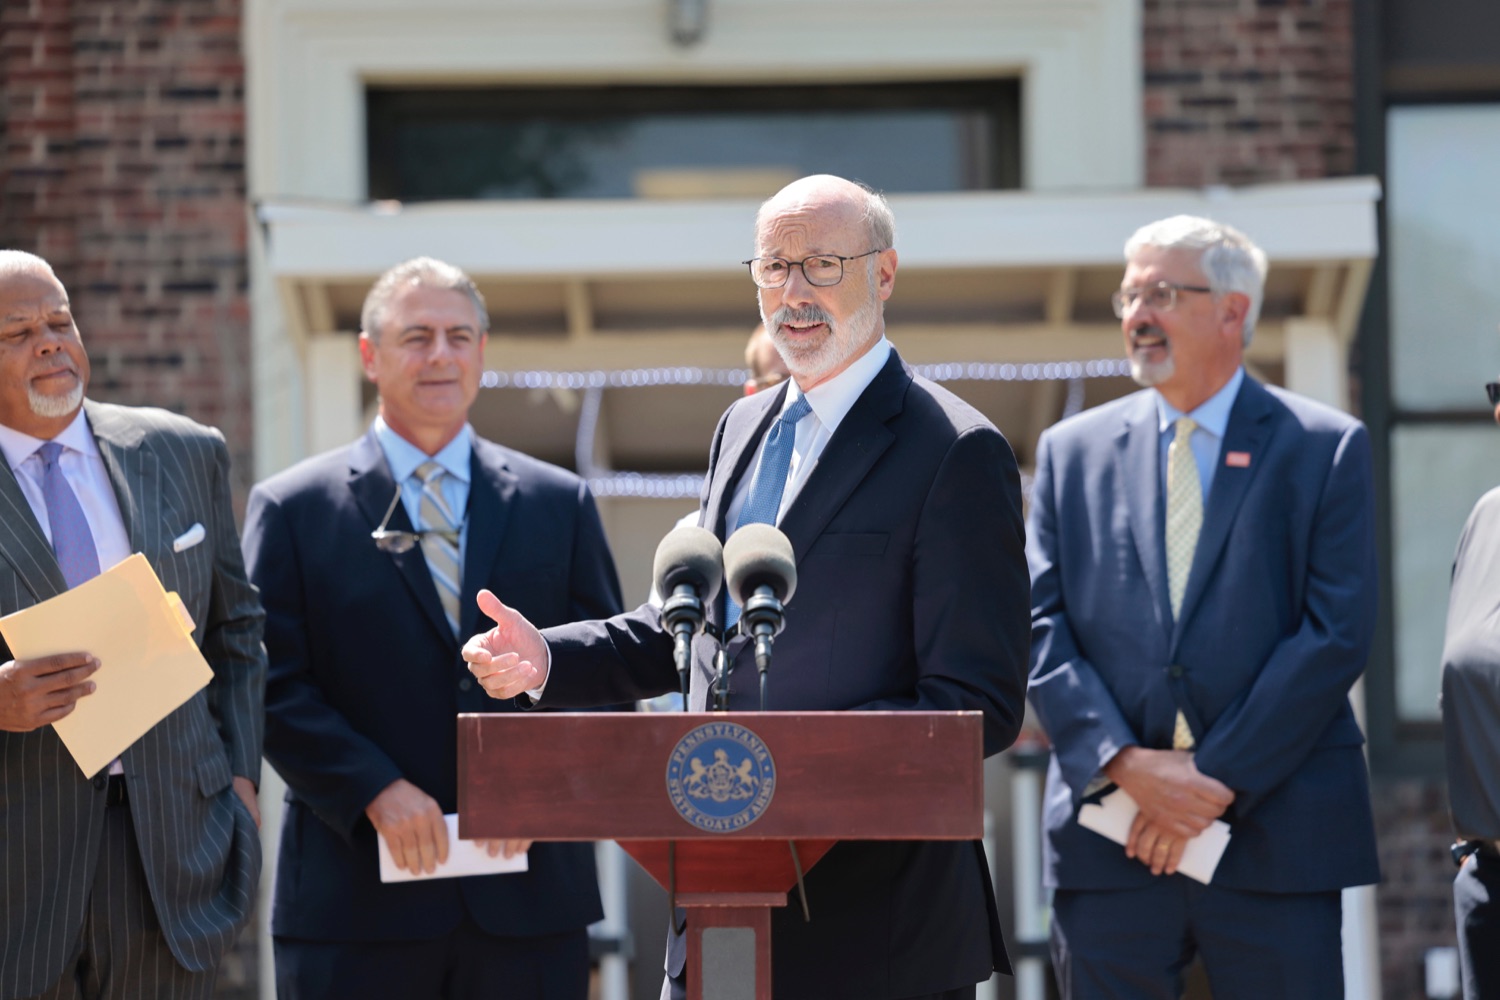 Gov. Wolf, Legislators Reintroduce PA Opportunity Program, Continue Fight for $2,000 Direct Payments to Pennsylvanians.<br><a href="https://filesource.amperwave.net/commonwealthofpa/photo/22070_gov_opportunityFund_06.jpg" target="_blank">⇣ Download Photo</a>